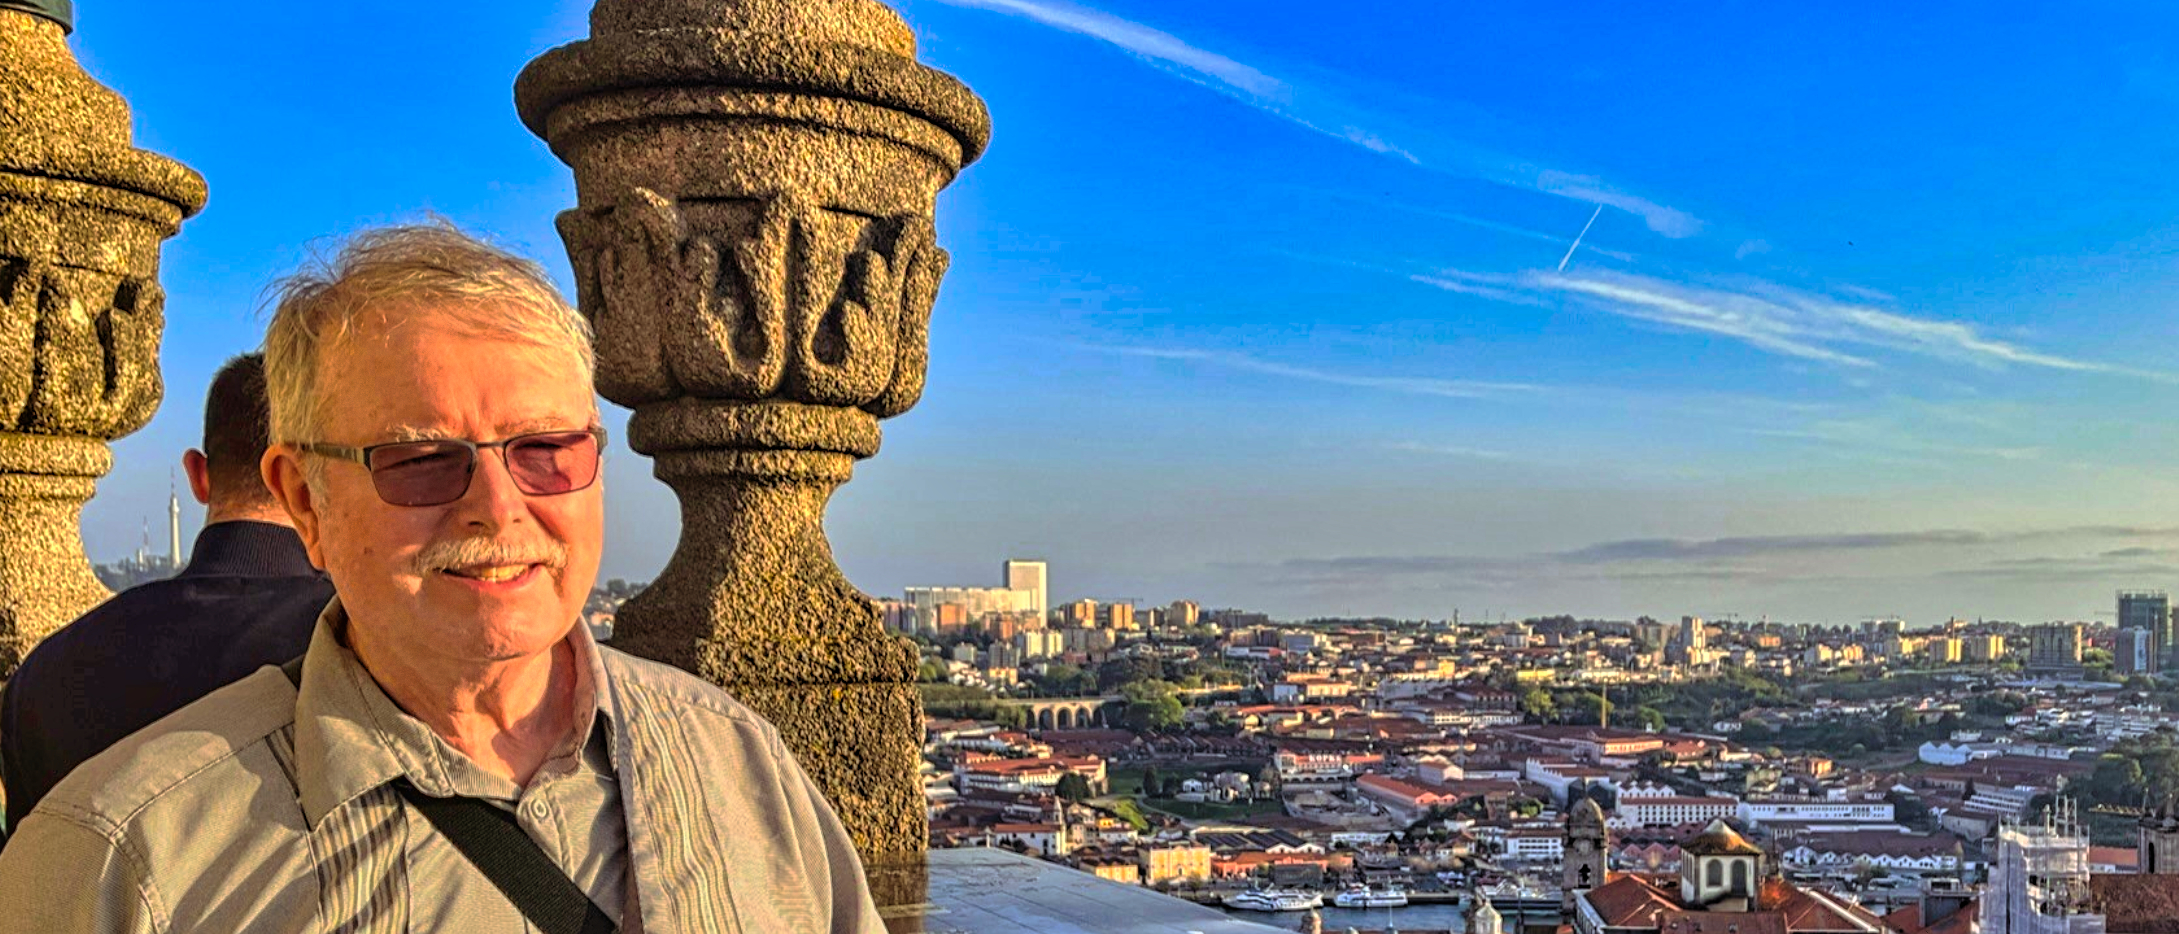 A man with glasses smiling with the city of Porto, Portugal behind him